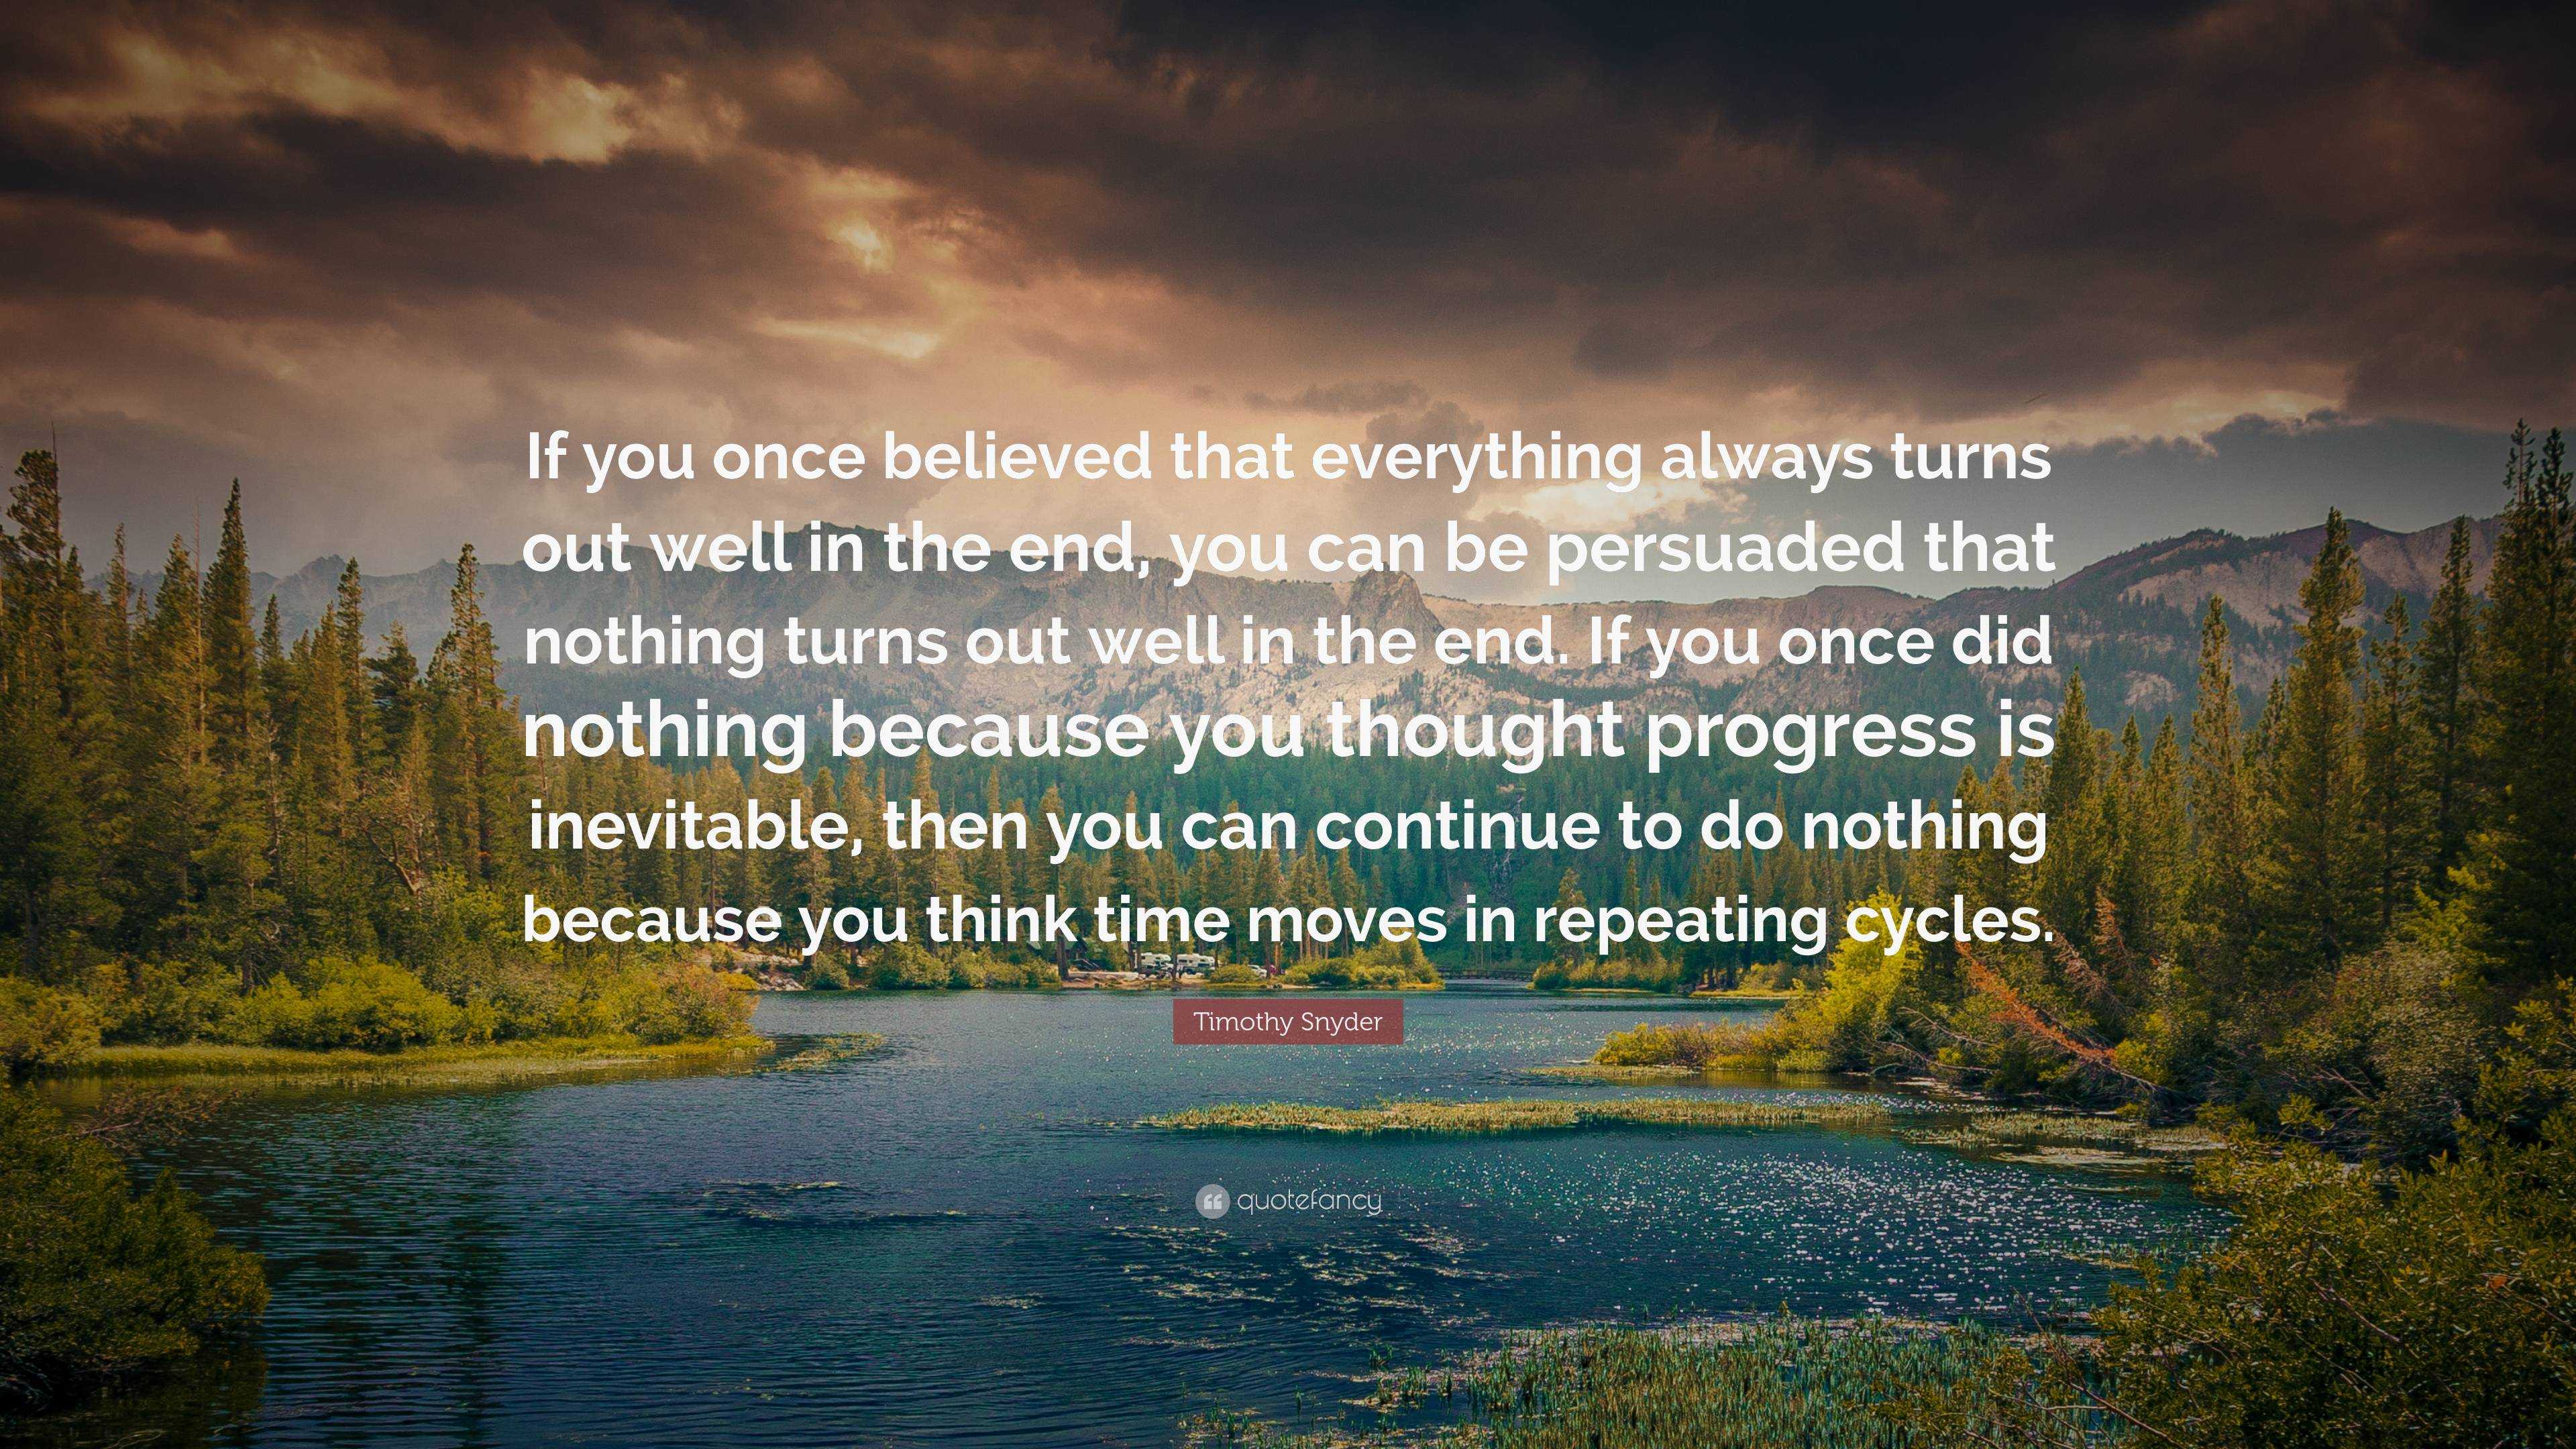 Timothy Snyder Quote: “If you once believed that everything always ...